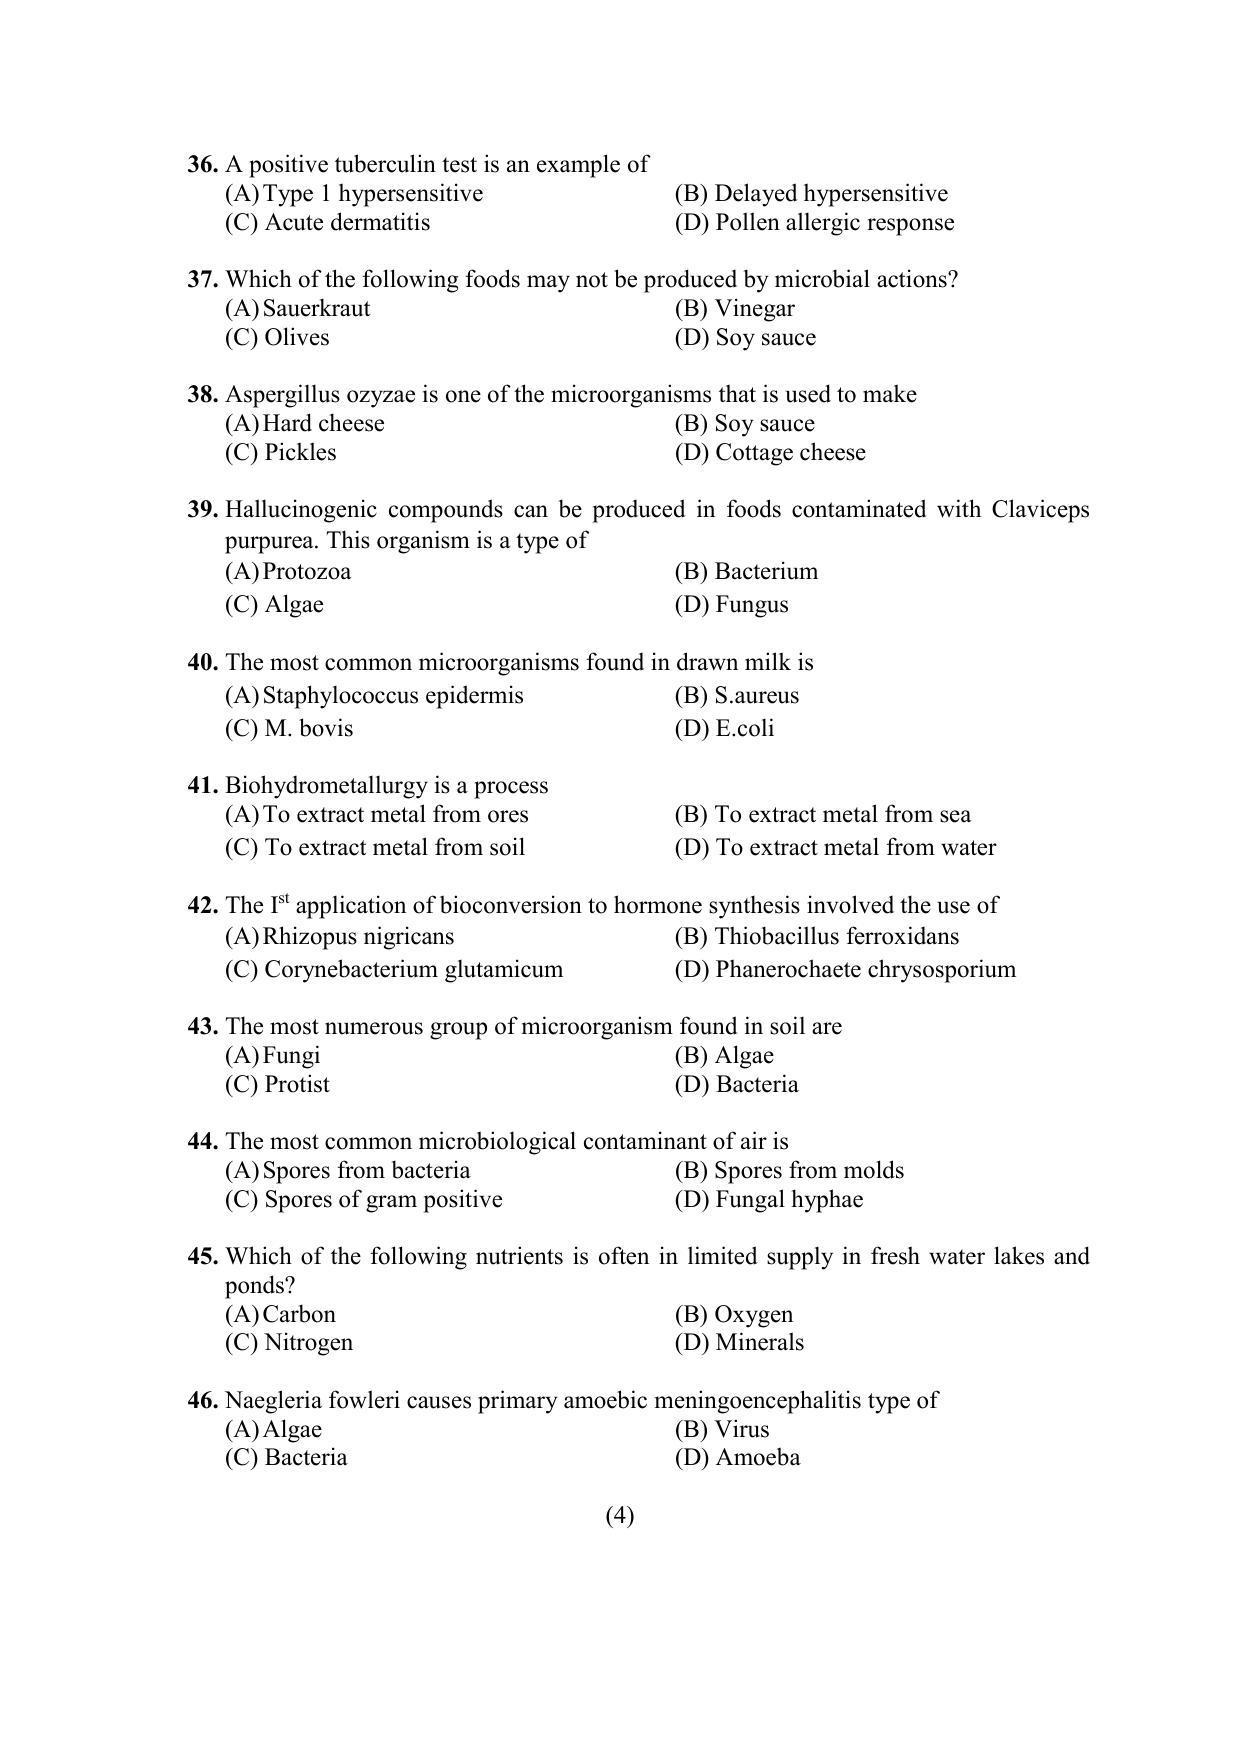 PU MPET Anthropology 2022 Question Papers - Page 52